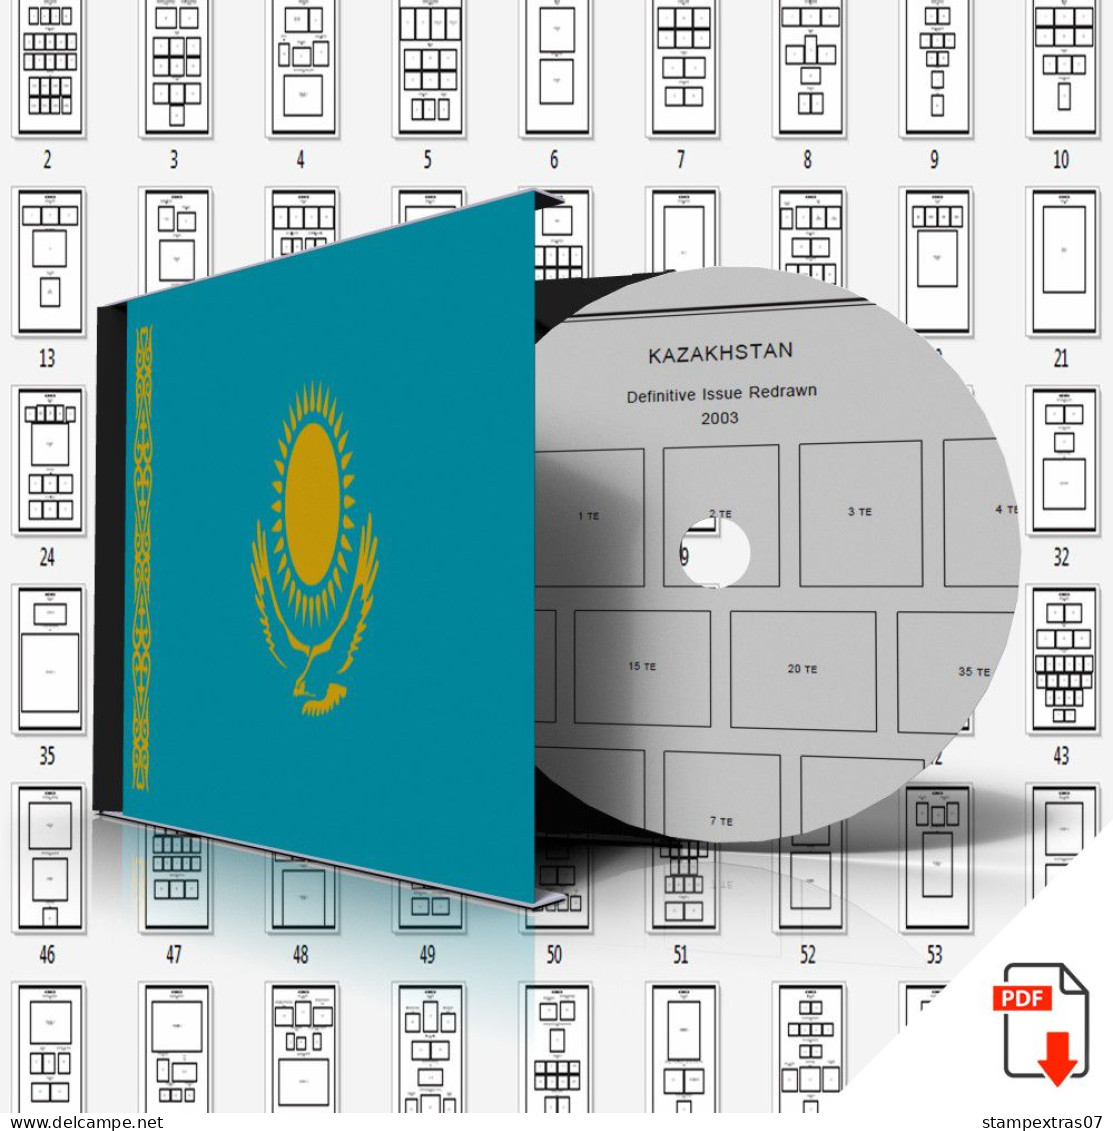 KAZAKHSTAN STAMP ALBUM PAGES 1992-2011 (82 Pages) - Englisch